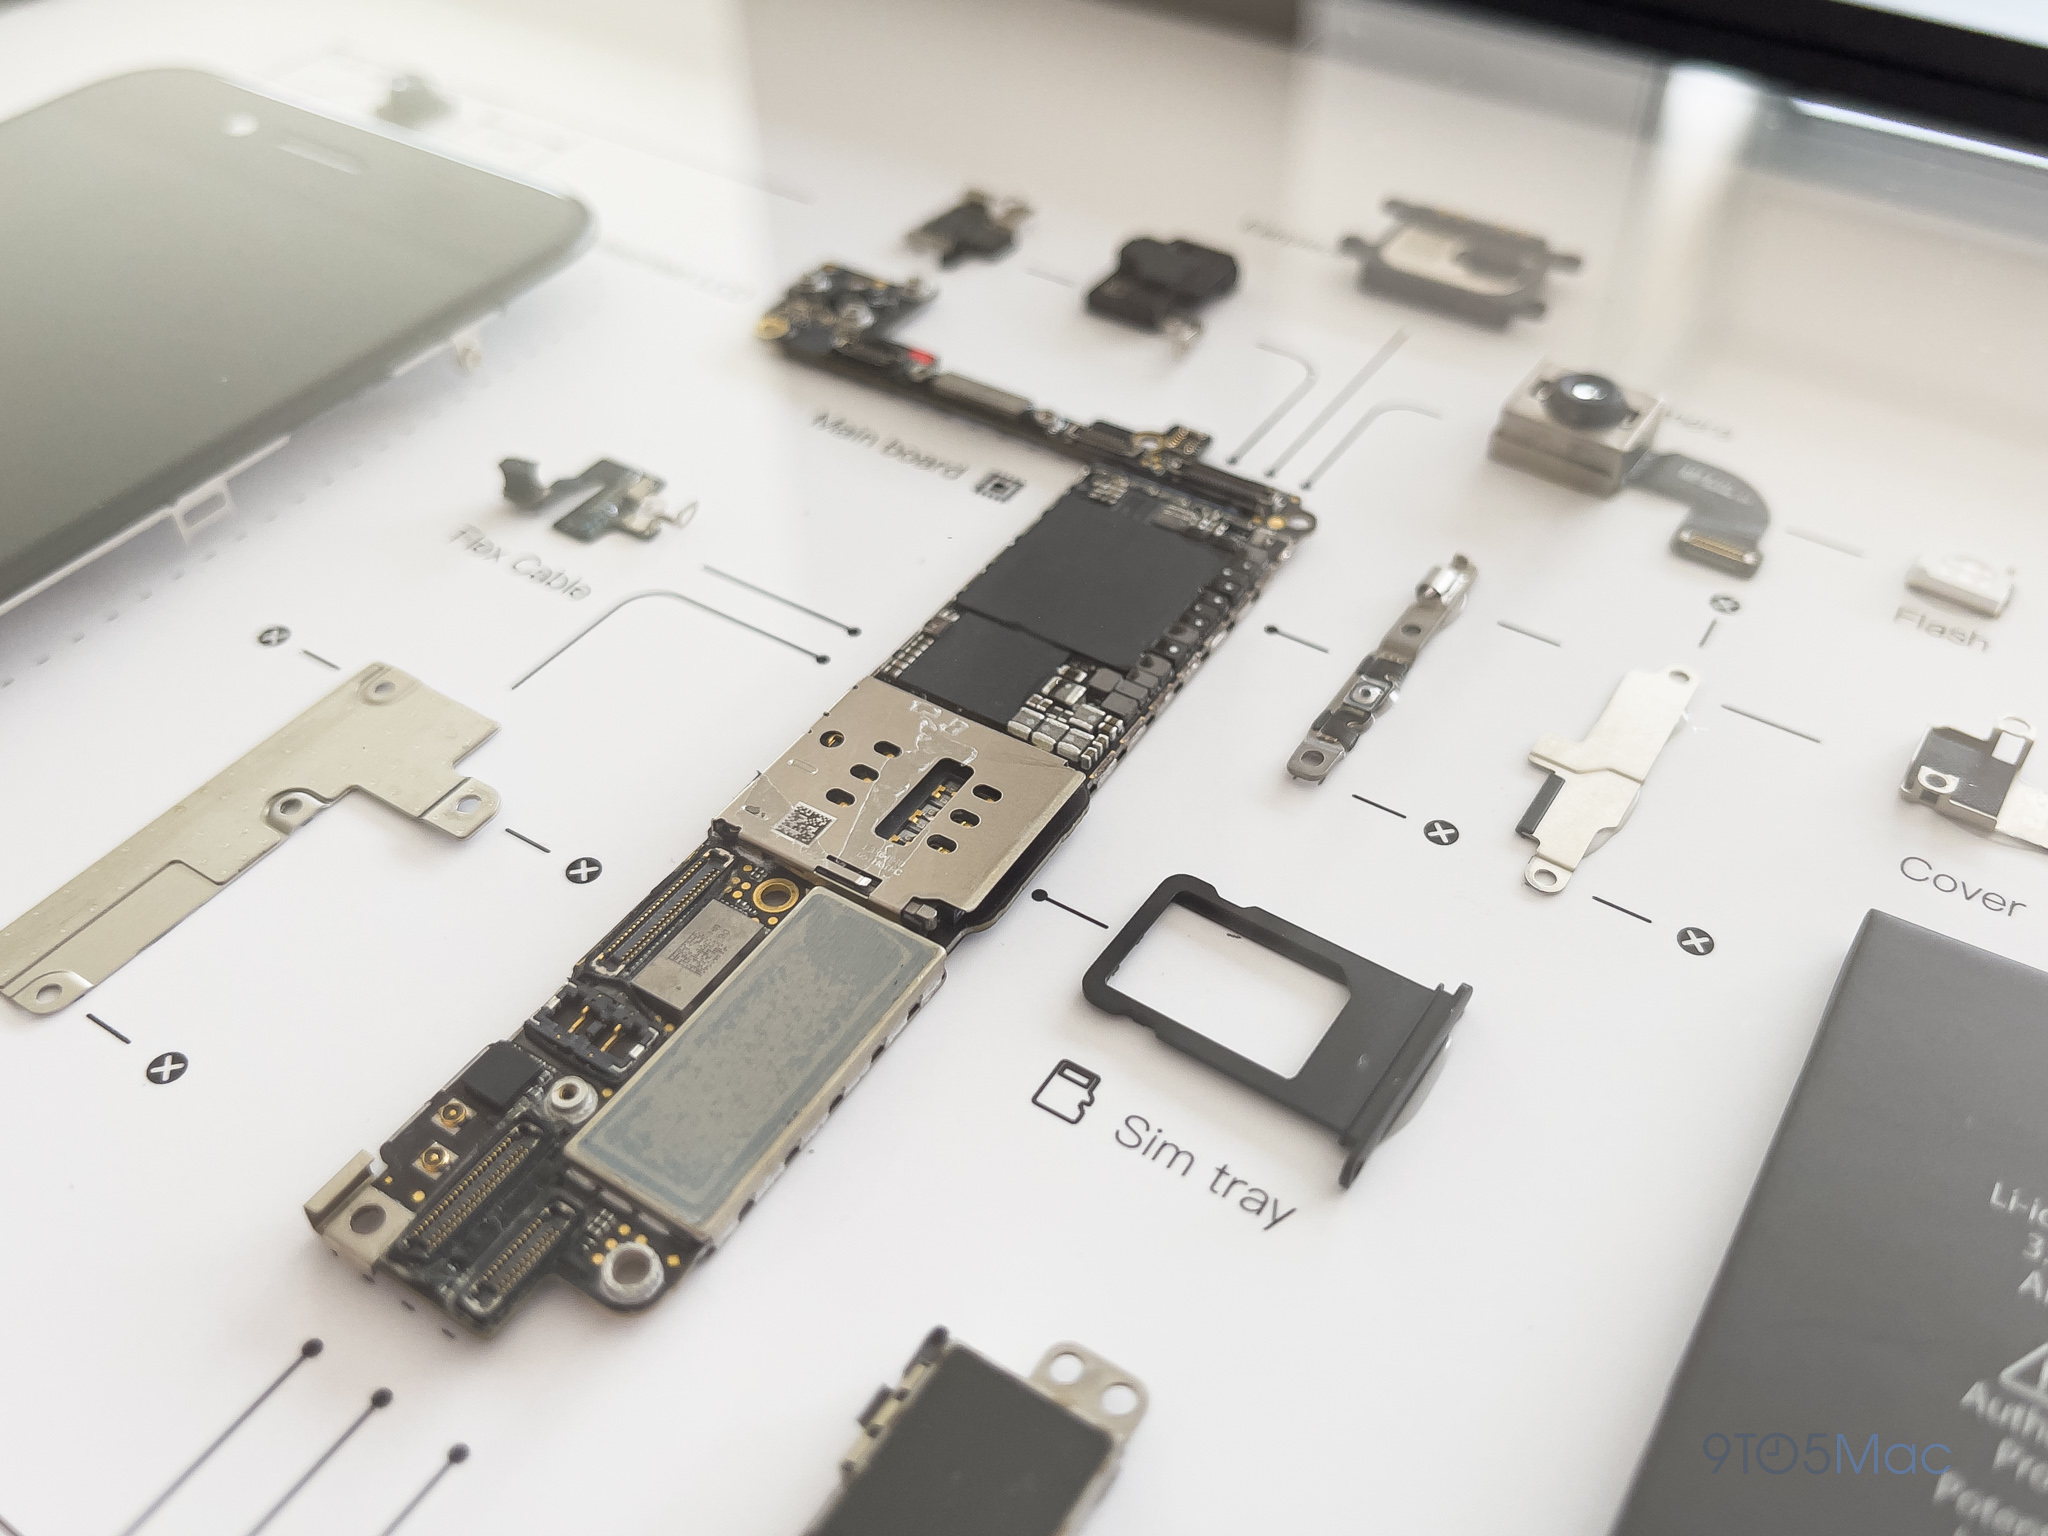 GRID iPhone 7 and its internal components.